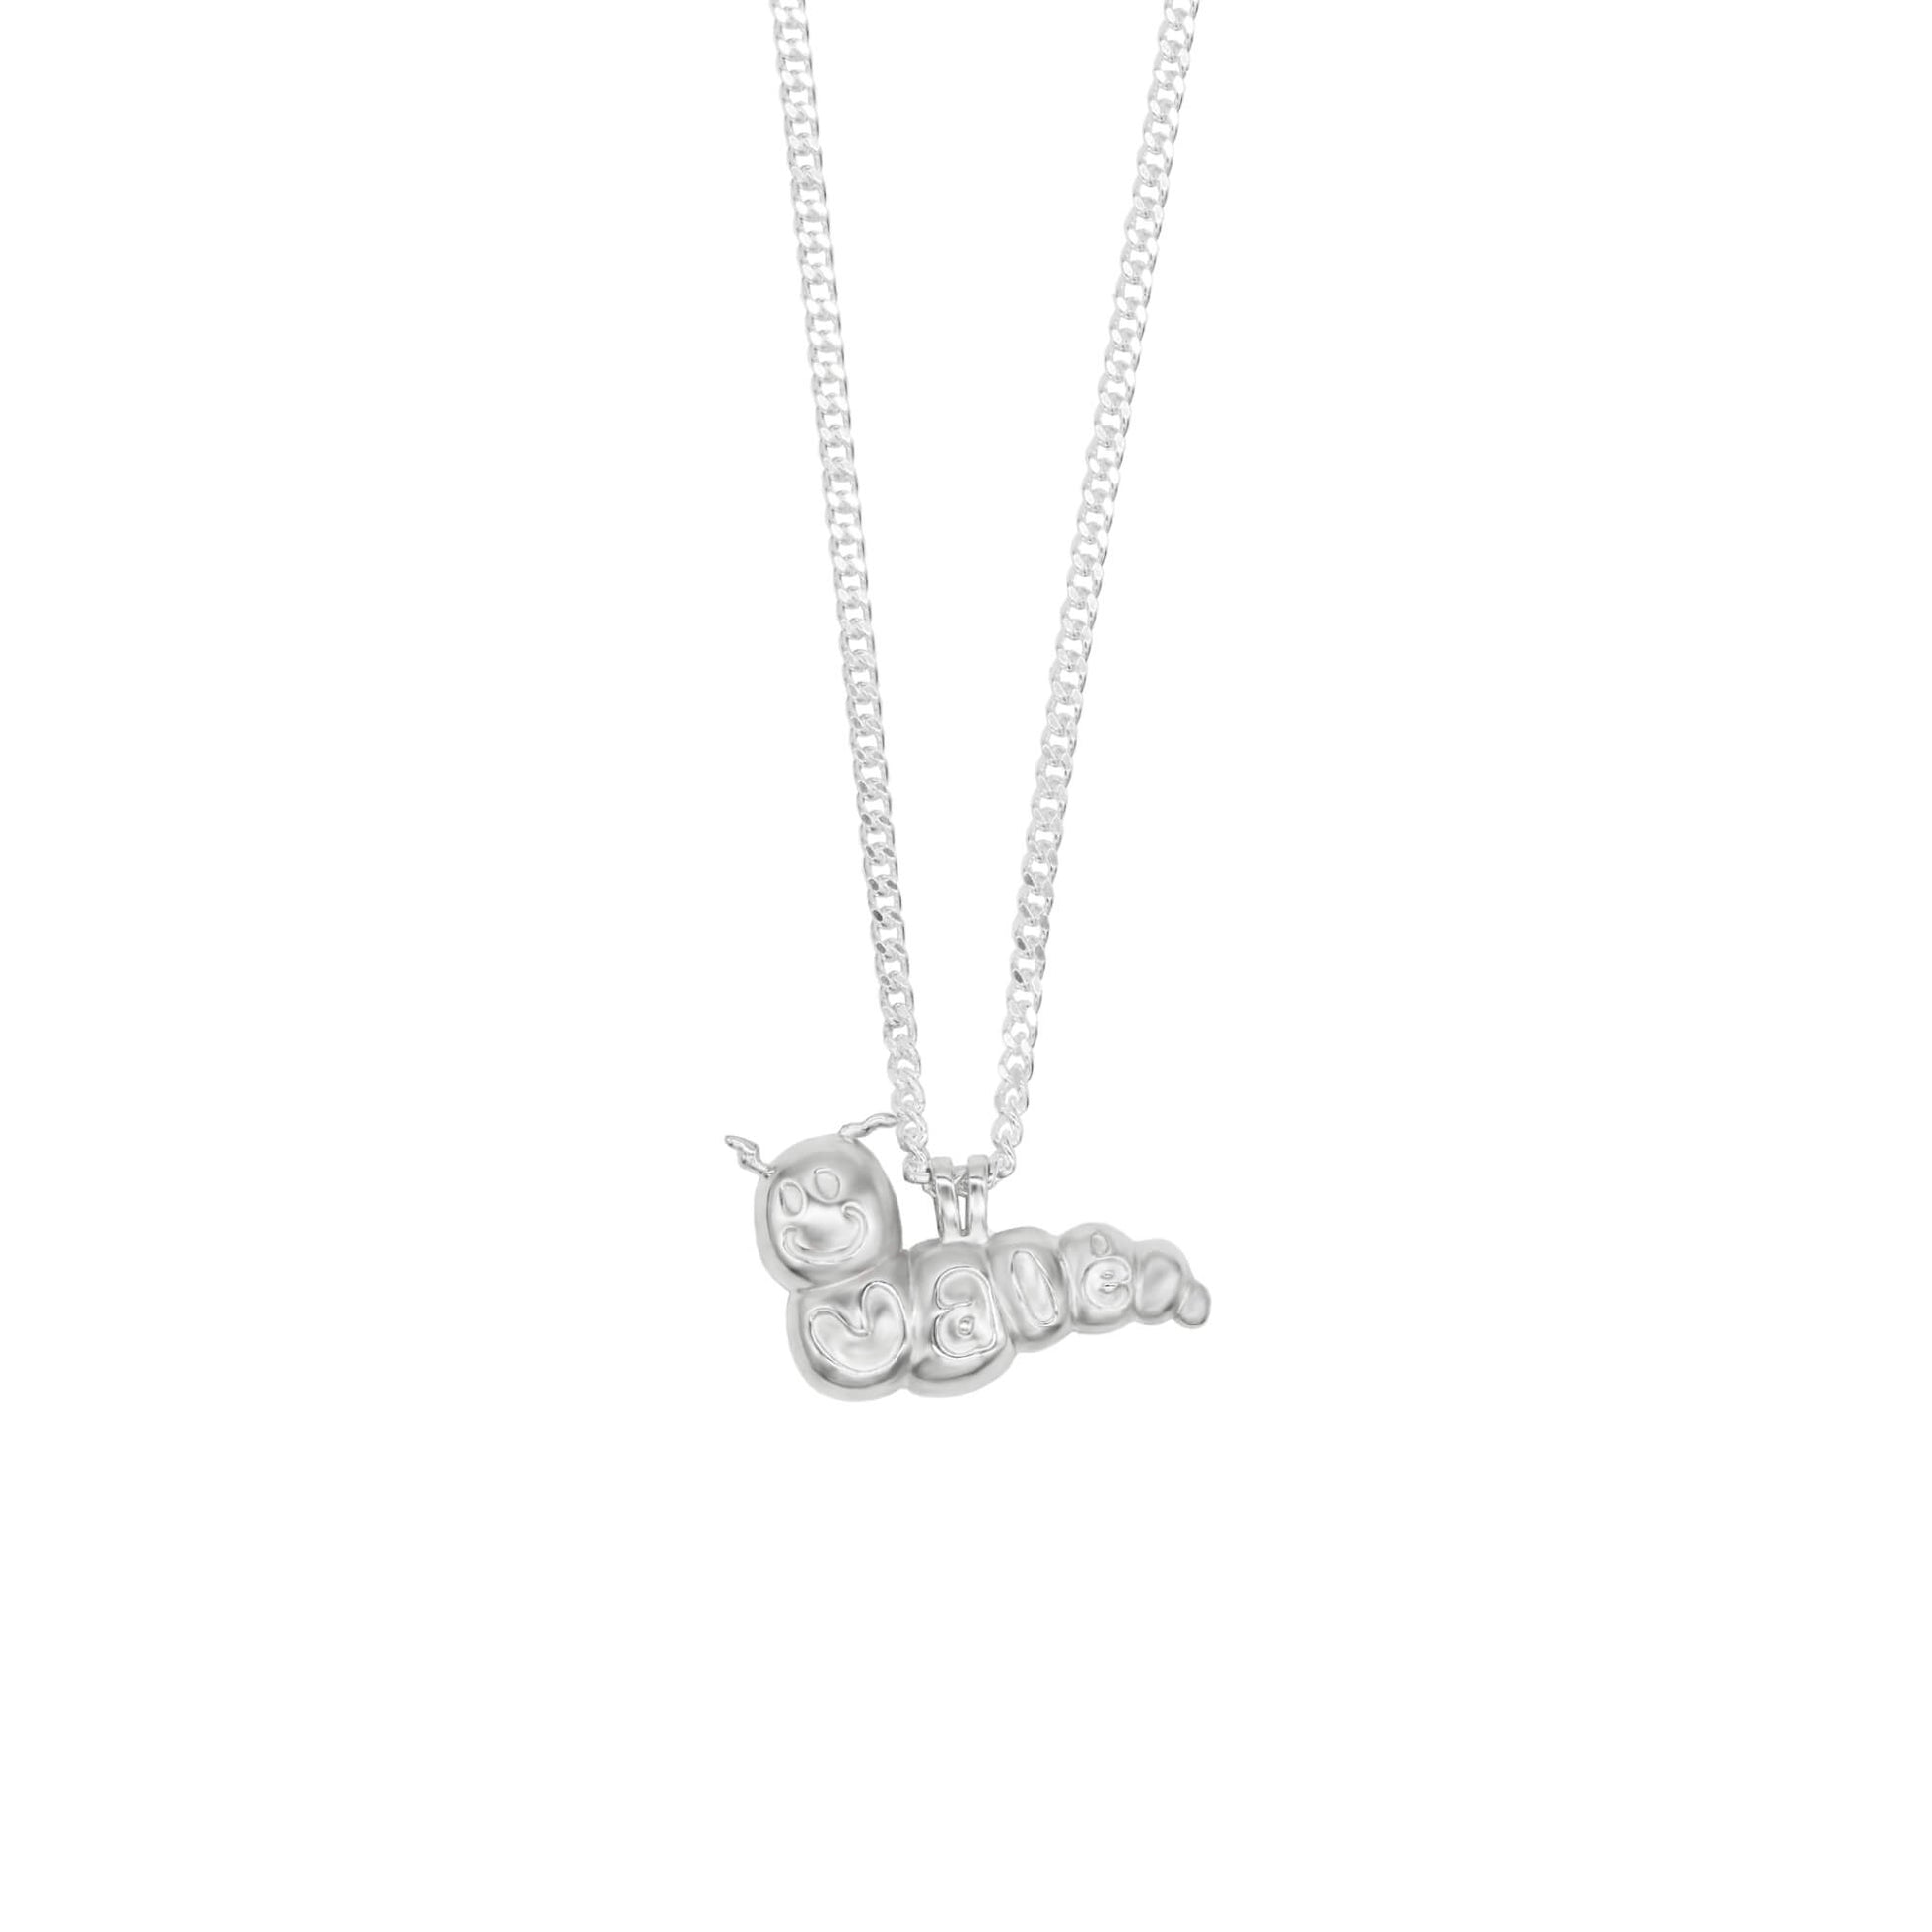 sterling silver caterpillar pendant with vale engraved on sterling silver chain.